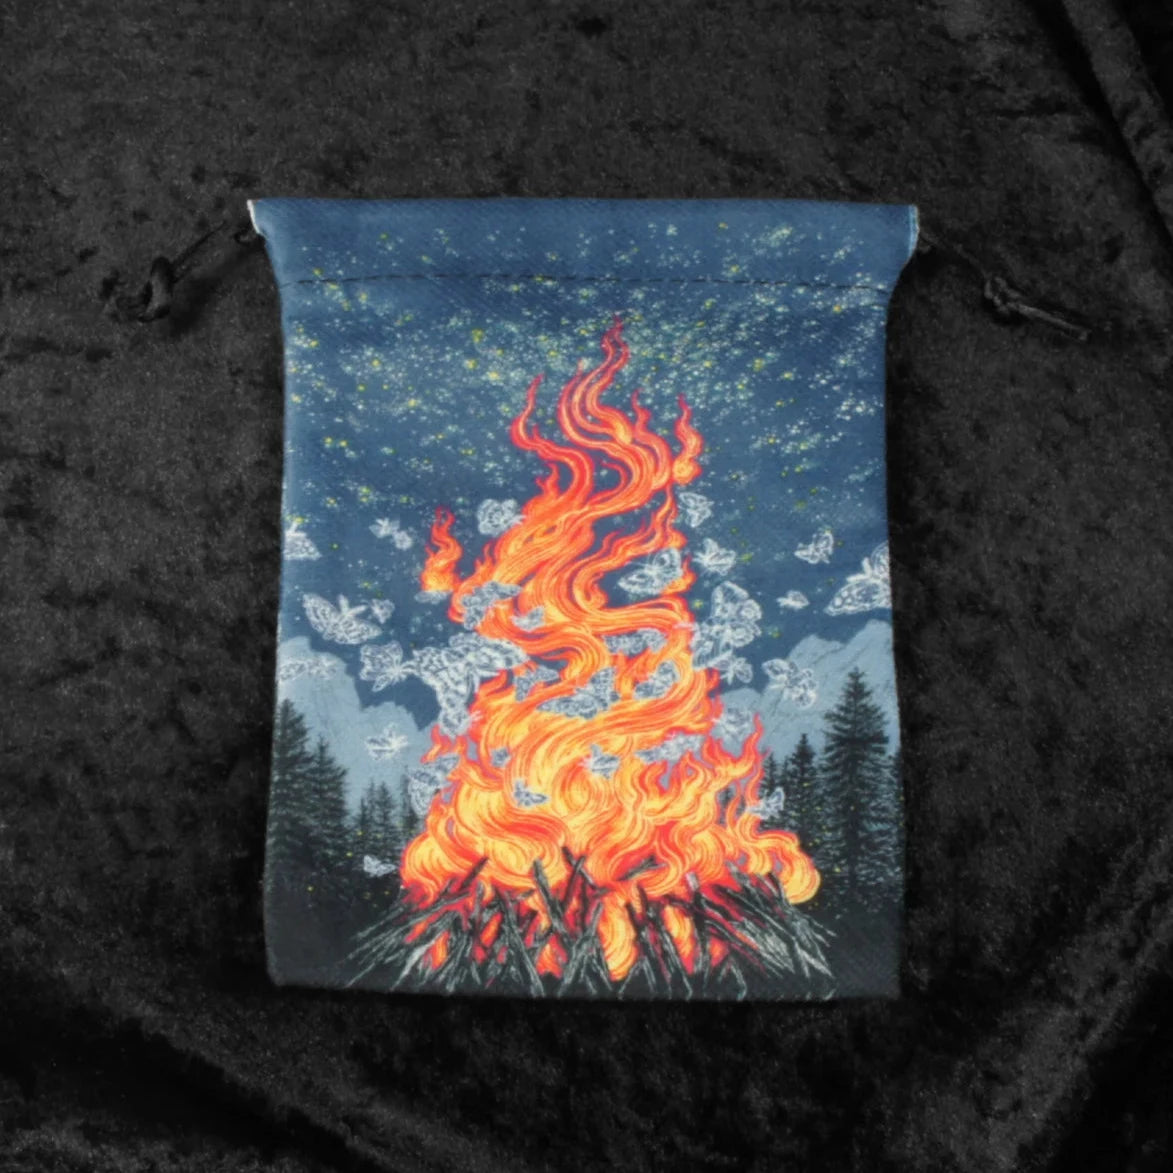 The image showcases the Adventurer's Rest Fantasy Drawstring Dice Bag in all its glory. The bag features a vibrant illustration of a campfire at its center, surrounded by intricate patterns reminiscent of ancient runes. The drawstring closure is visible at the top of the bag, adding an element of functionality to its captivating design.